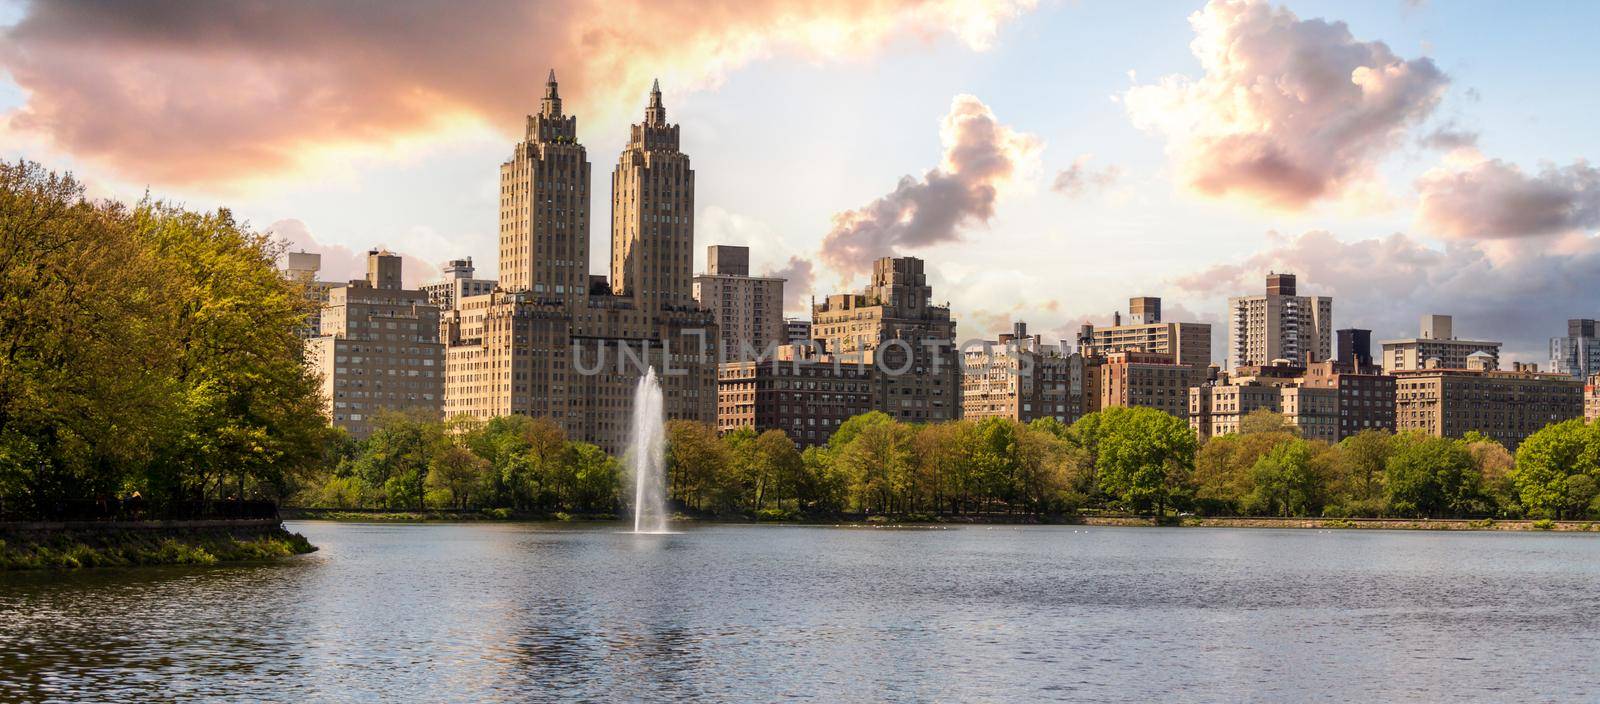 Skyline panorama with Eldorado building and reservoir with fountain in Central Park in midtown Manhattan in New York City by Mariakray